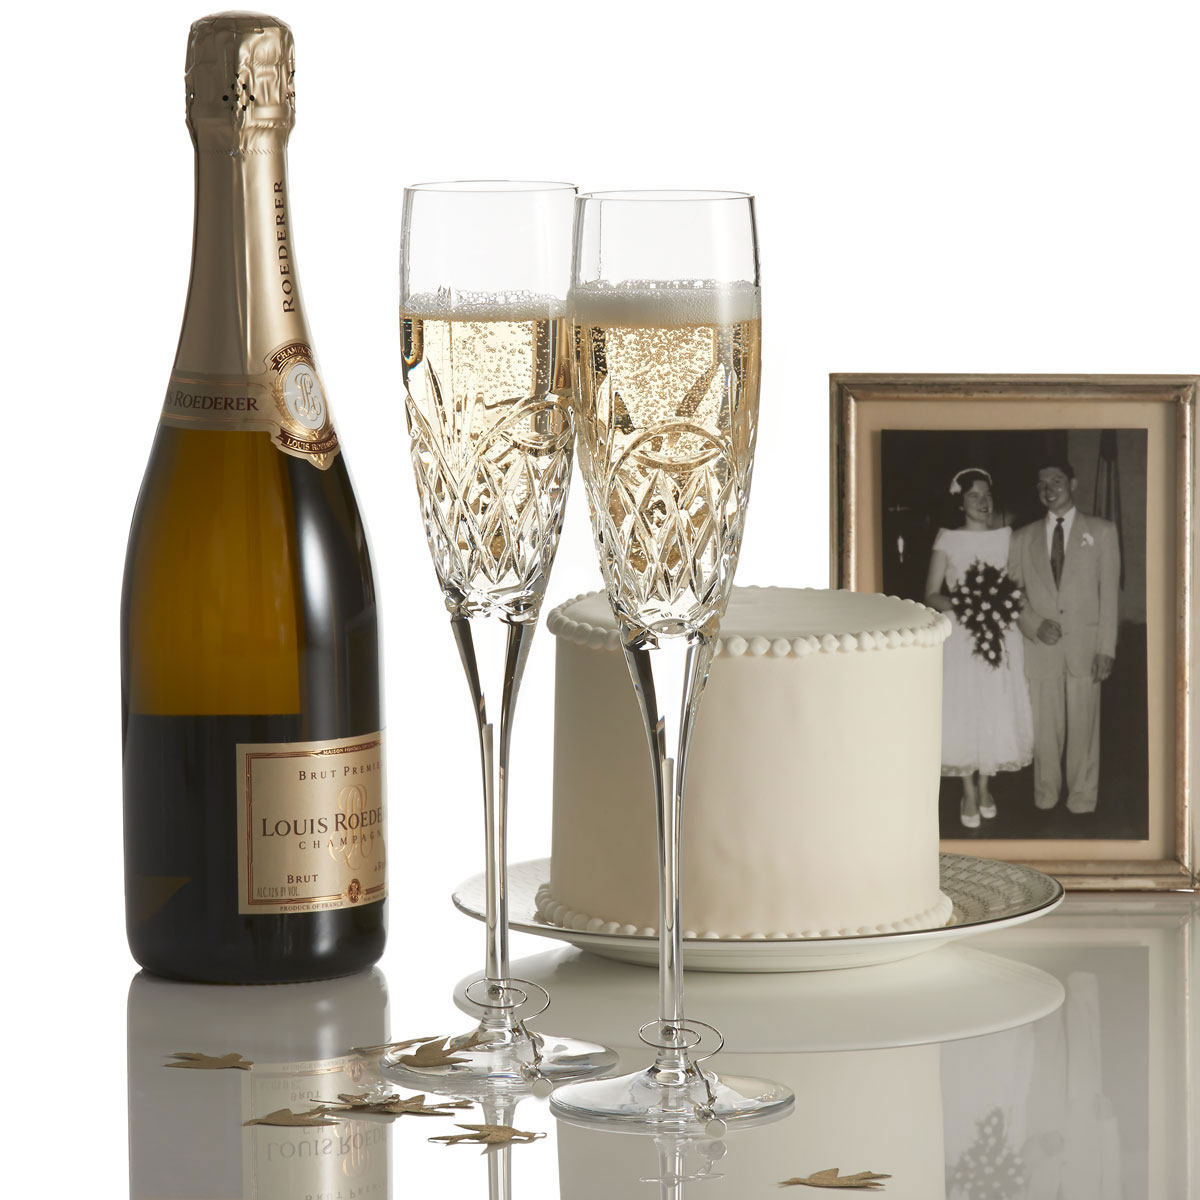 Waterford Crystal True Love Forever Champagne Toasting Flutes, Pair